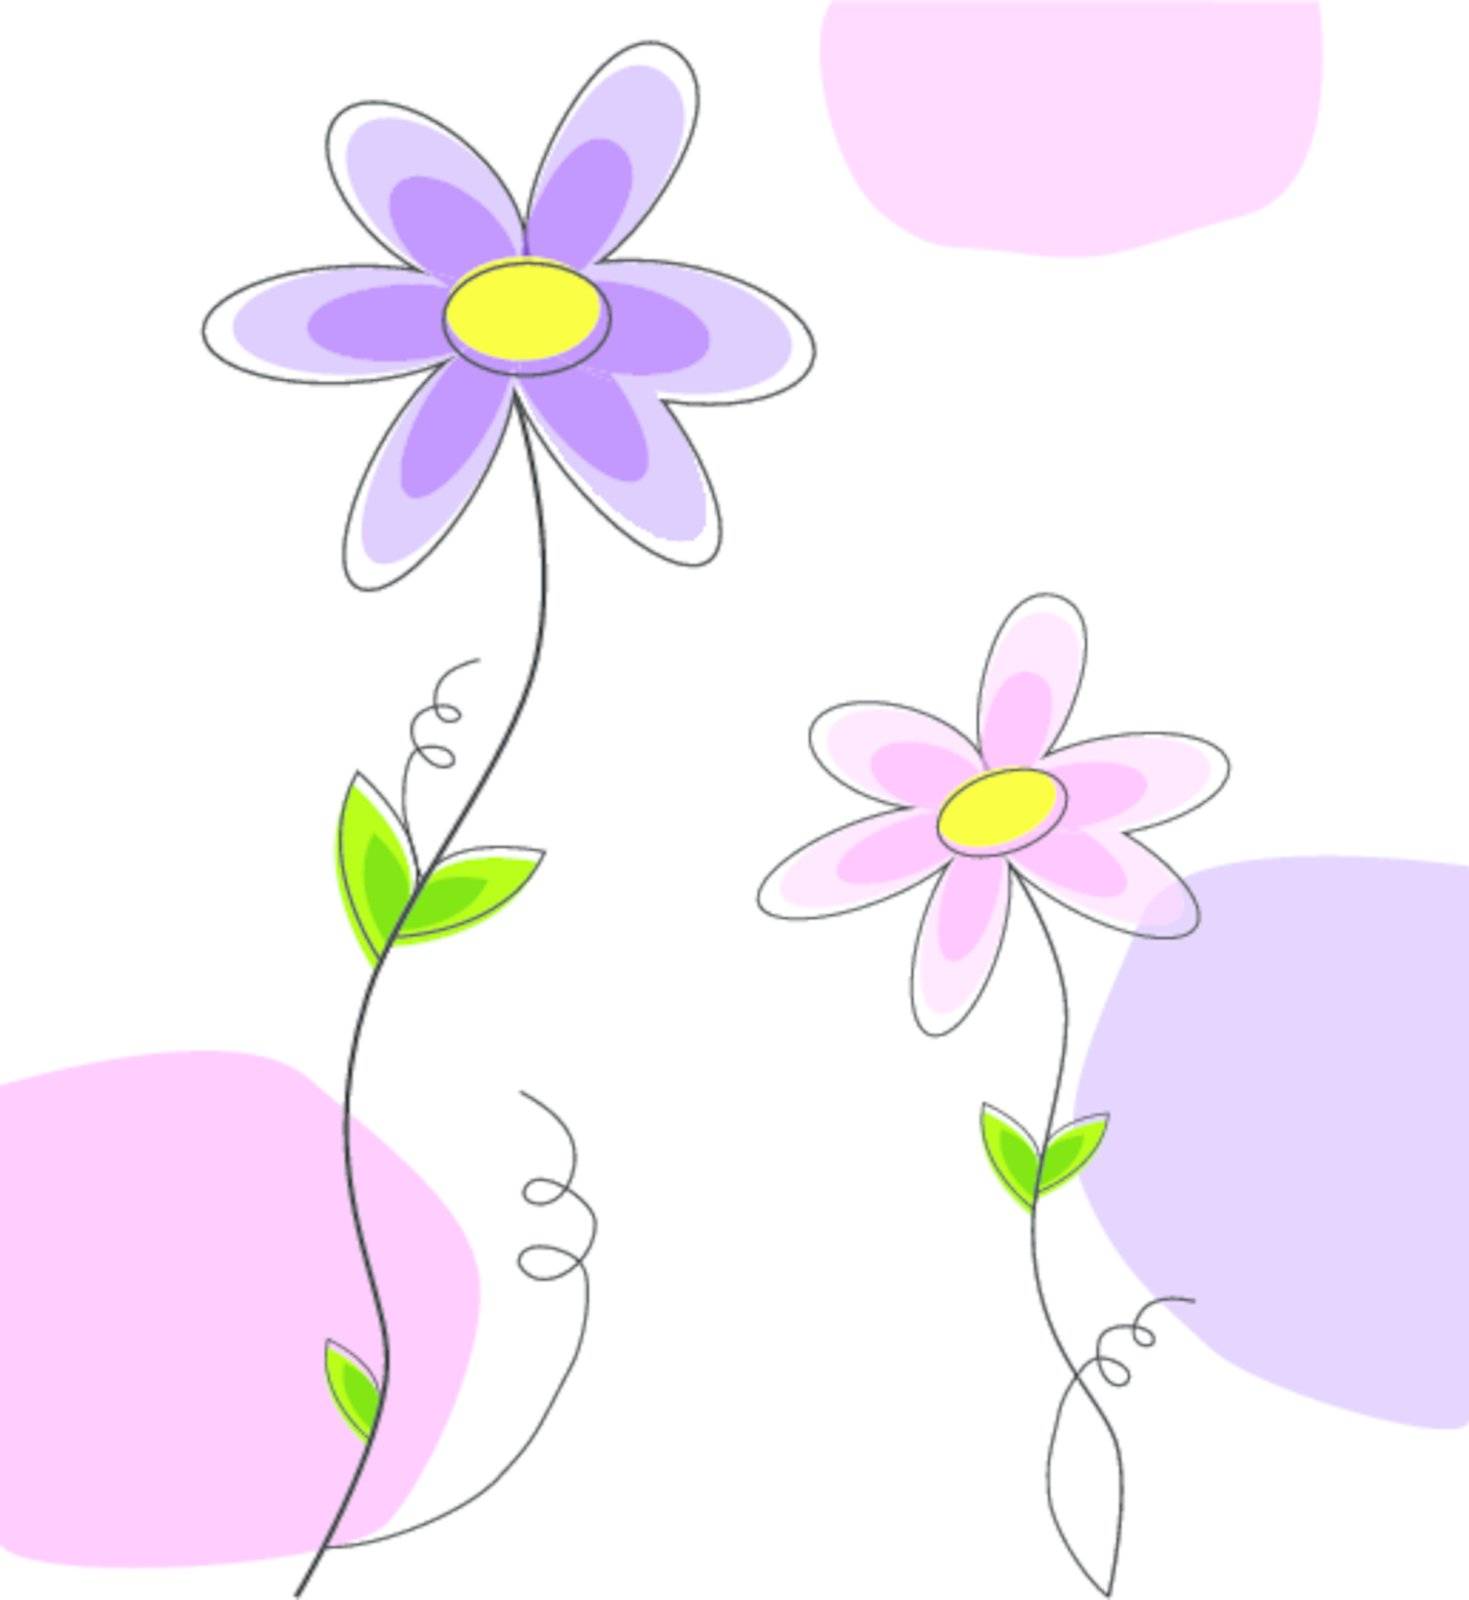 Cute pink and purple spring summer daisy flowers